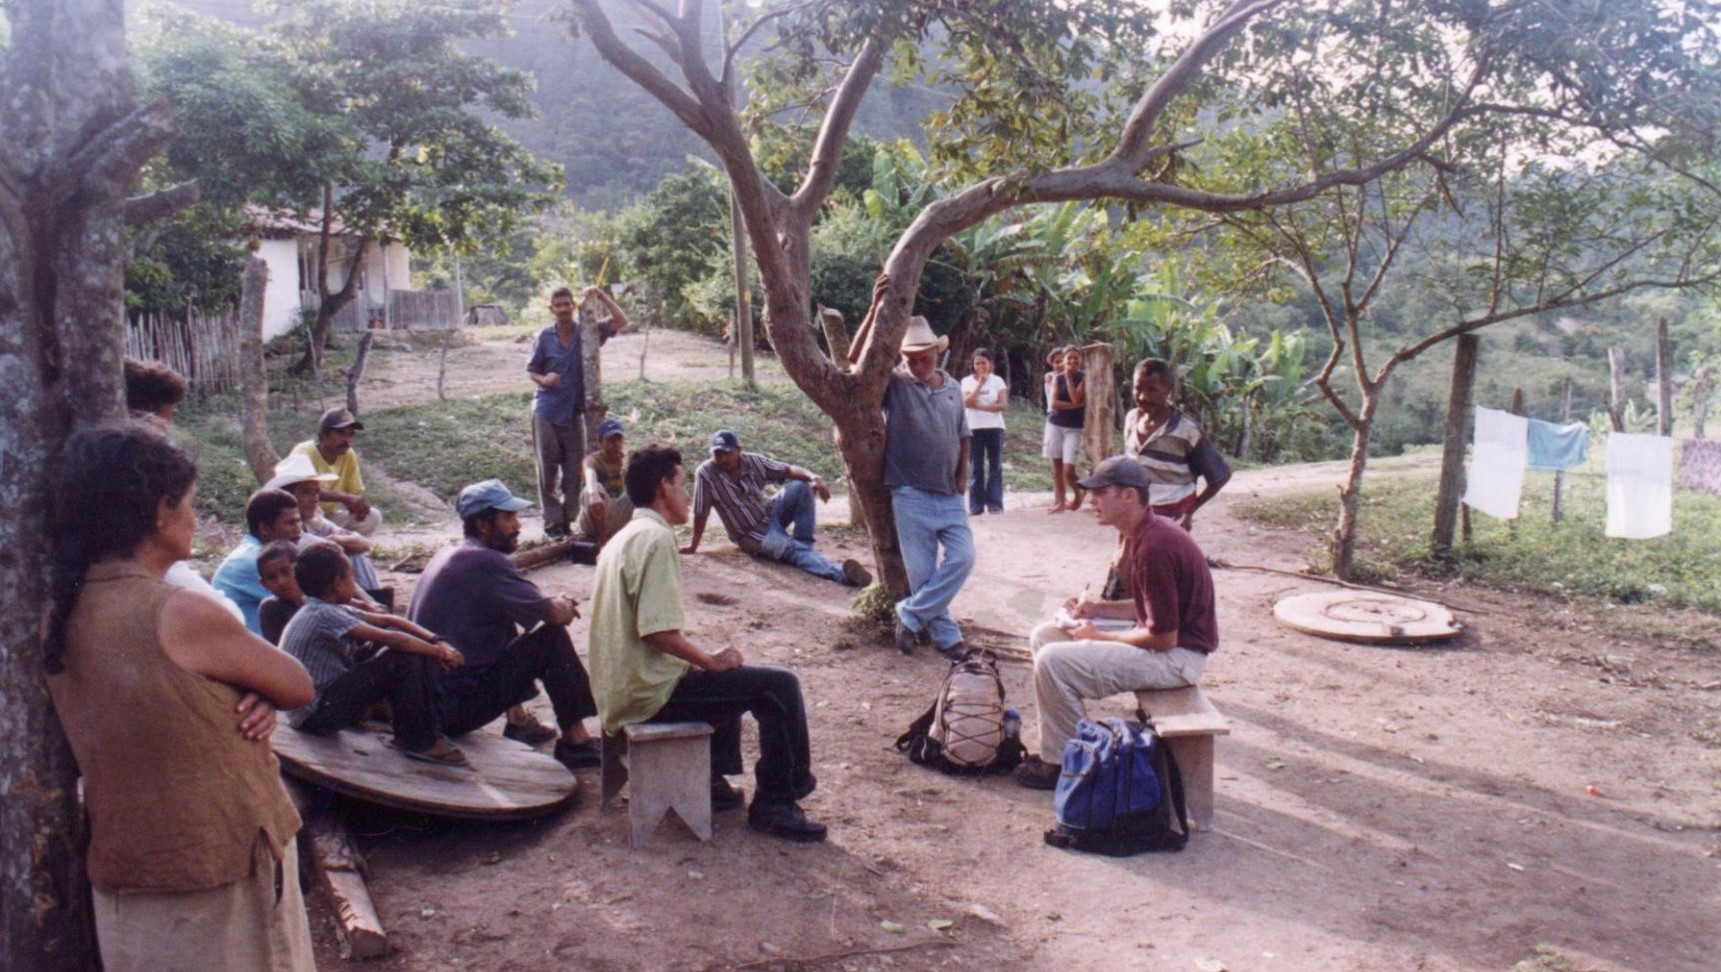 During his time in the Peace Corps, Mark worked with community members in Honduras on water issues.